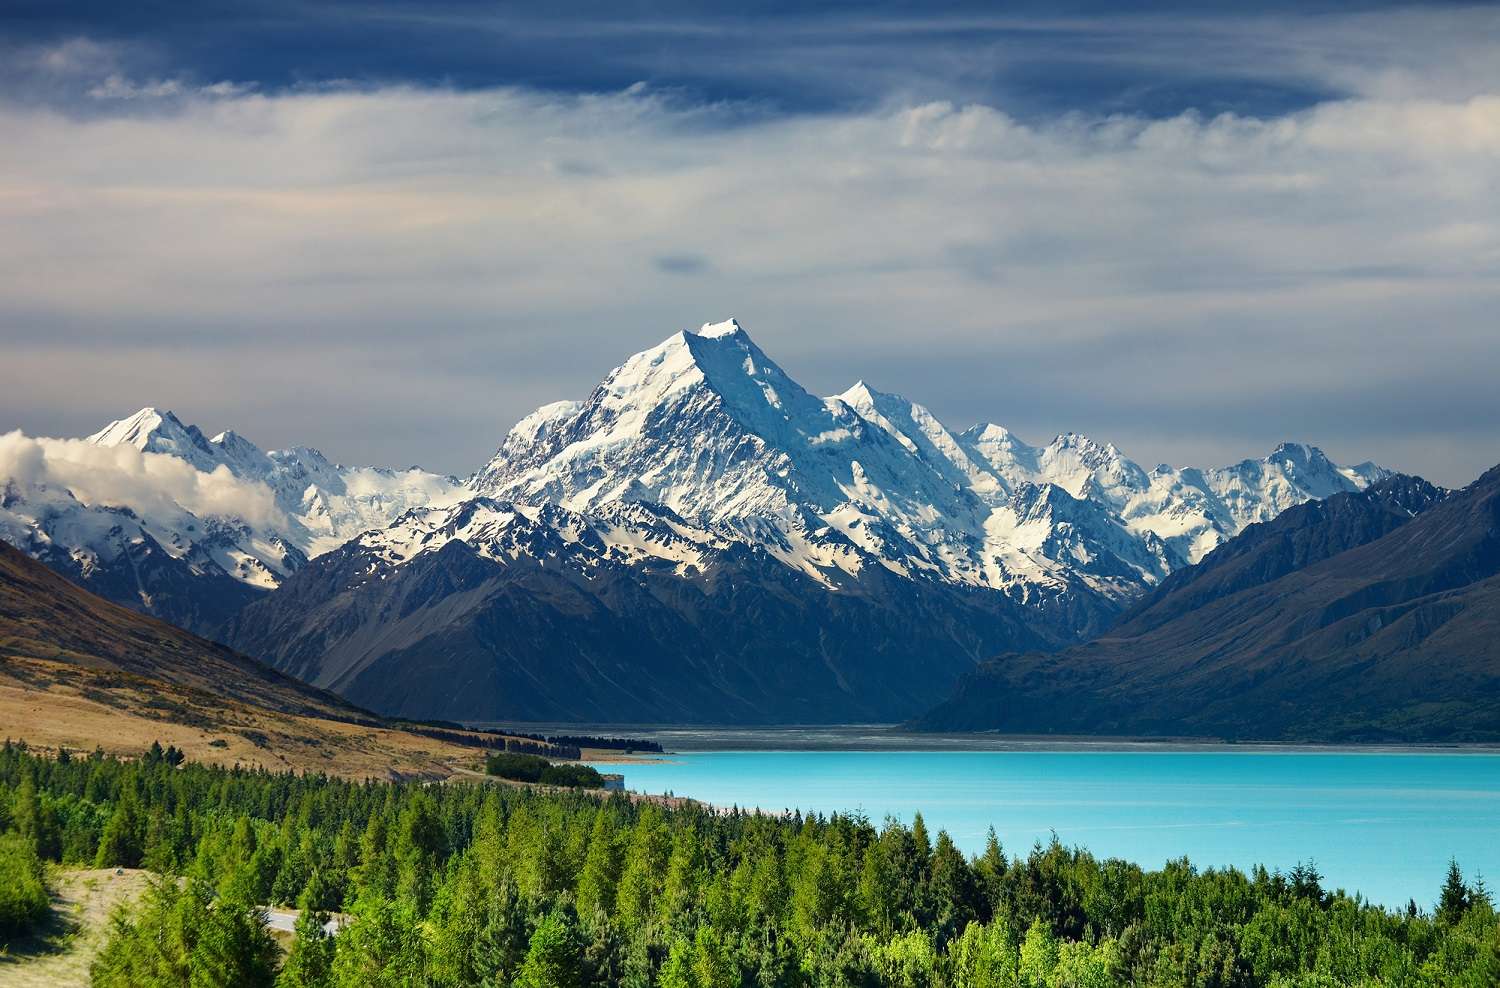 A beautiful view of Mount Cook and Pukaki Lake in New Zealand with blue water and snow-capped mountains